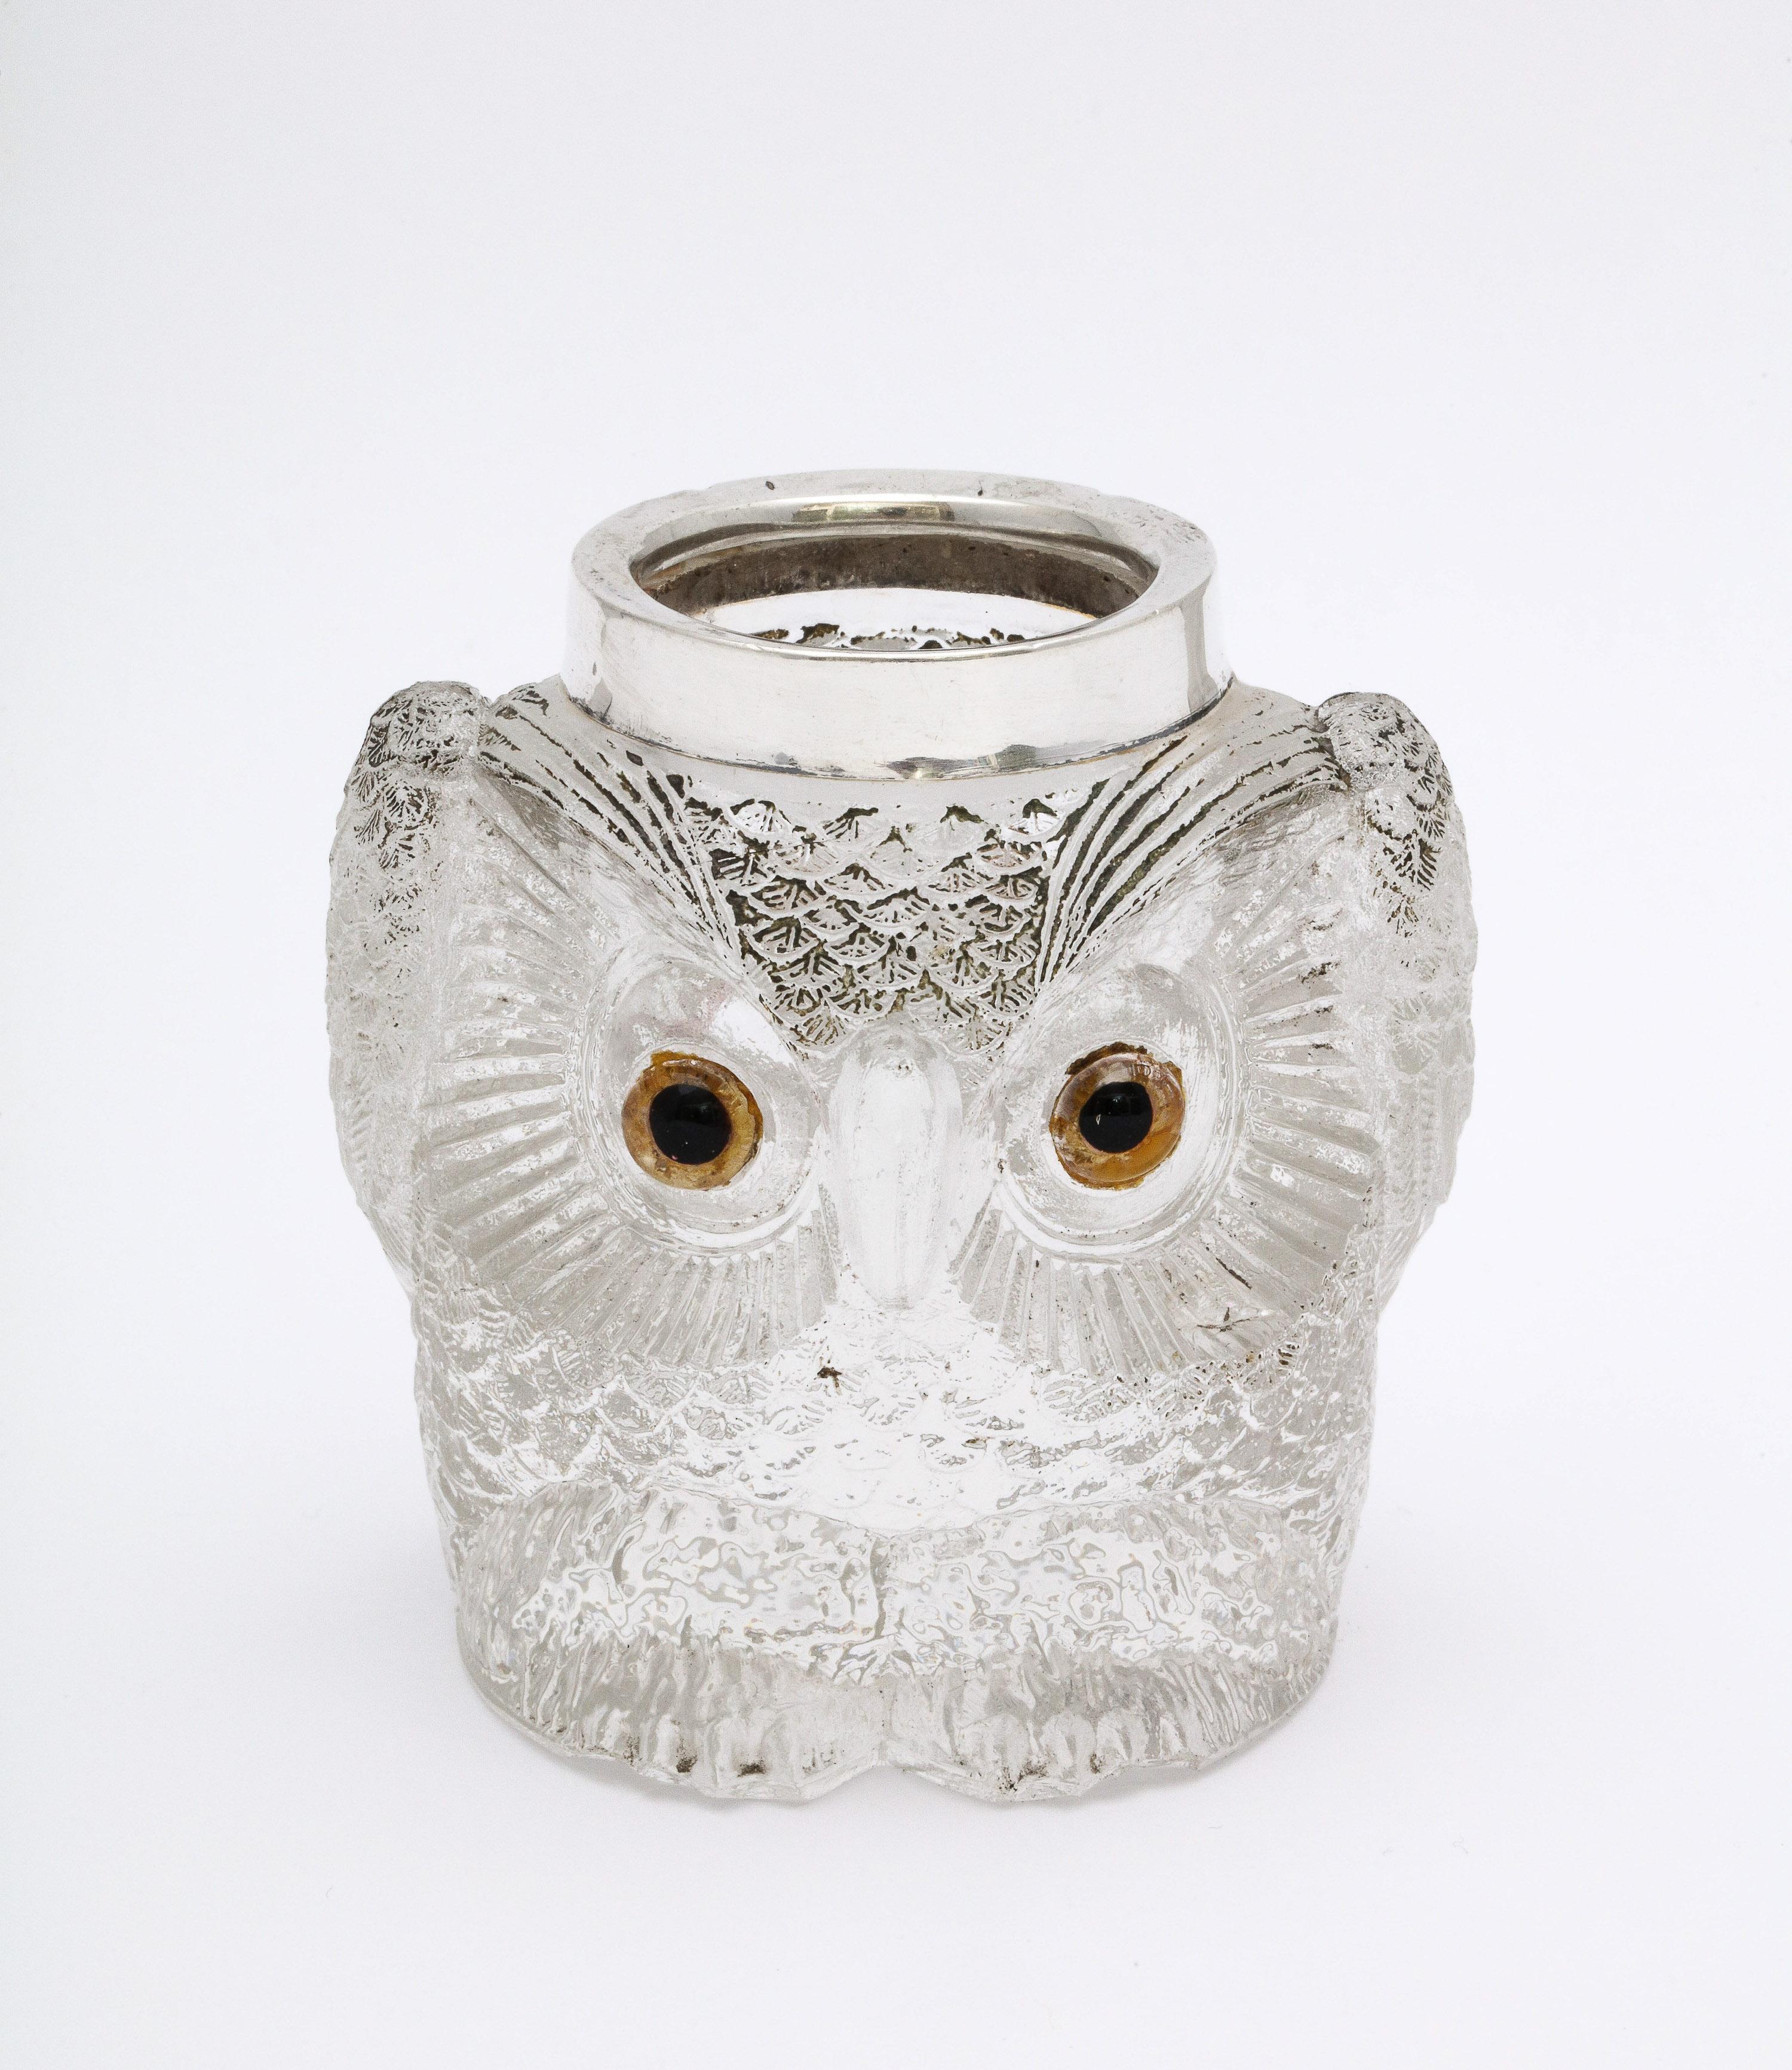 Early 20th Century Rare Art Deco Period Sterling Silver-Mounted Glass Owl-Form Match Striker For Sale